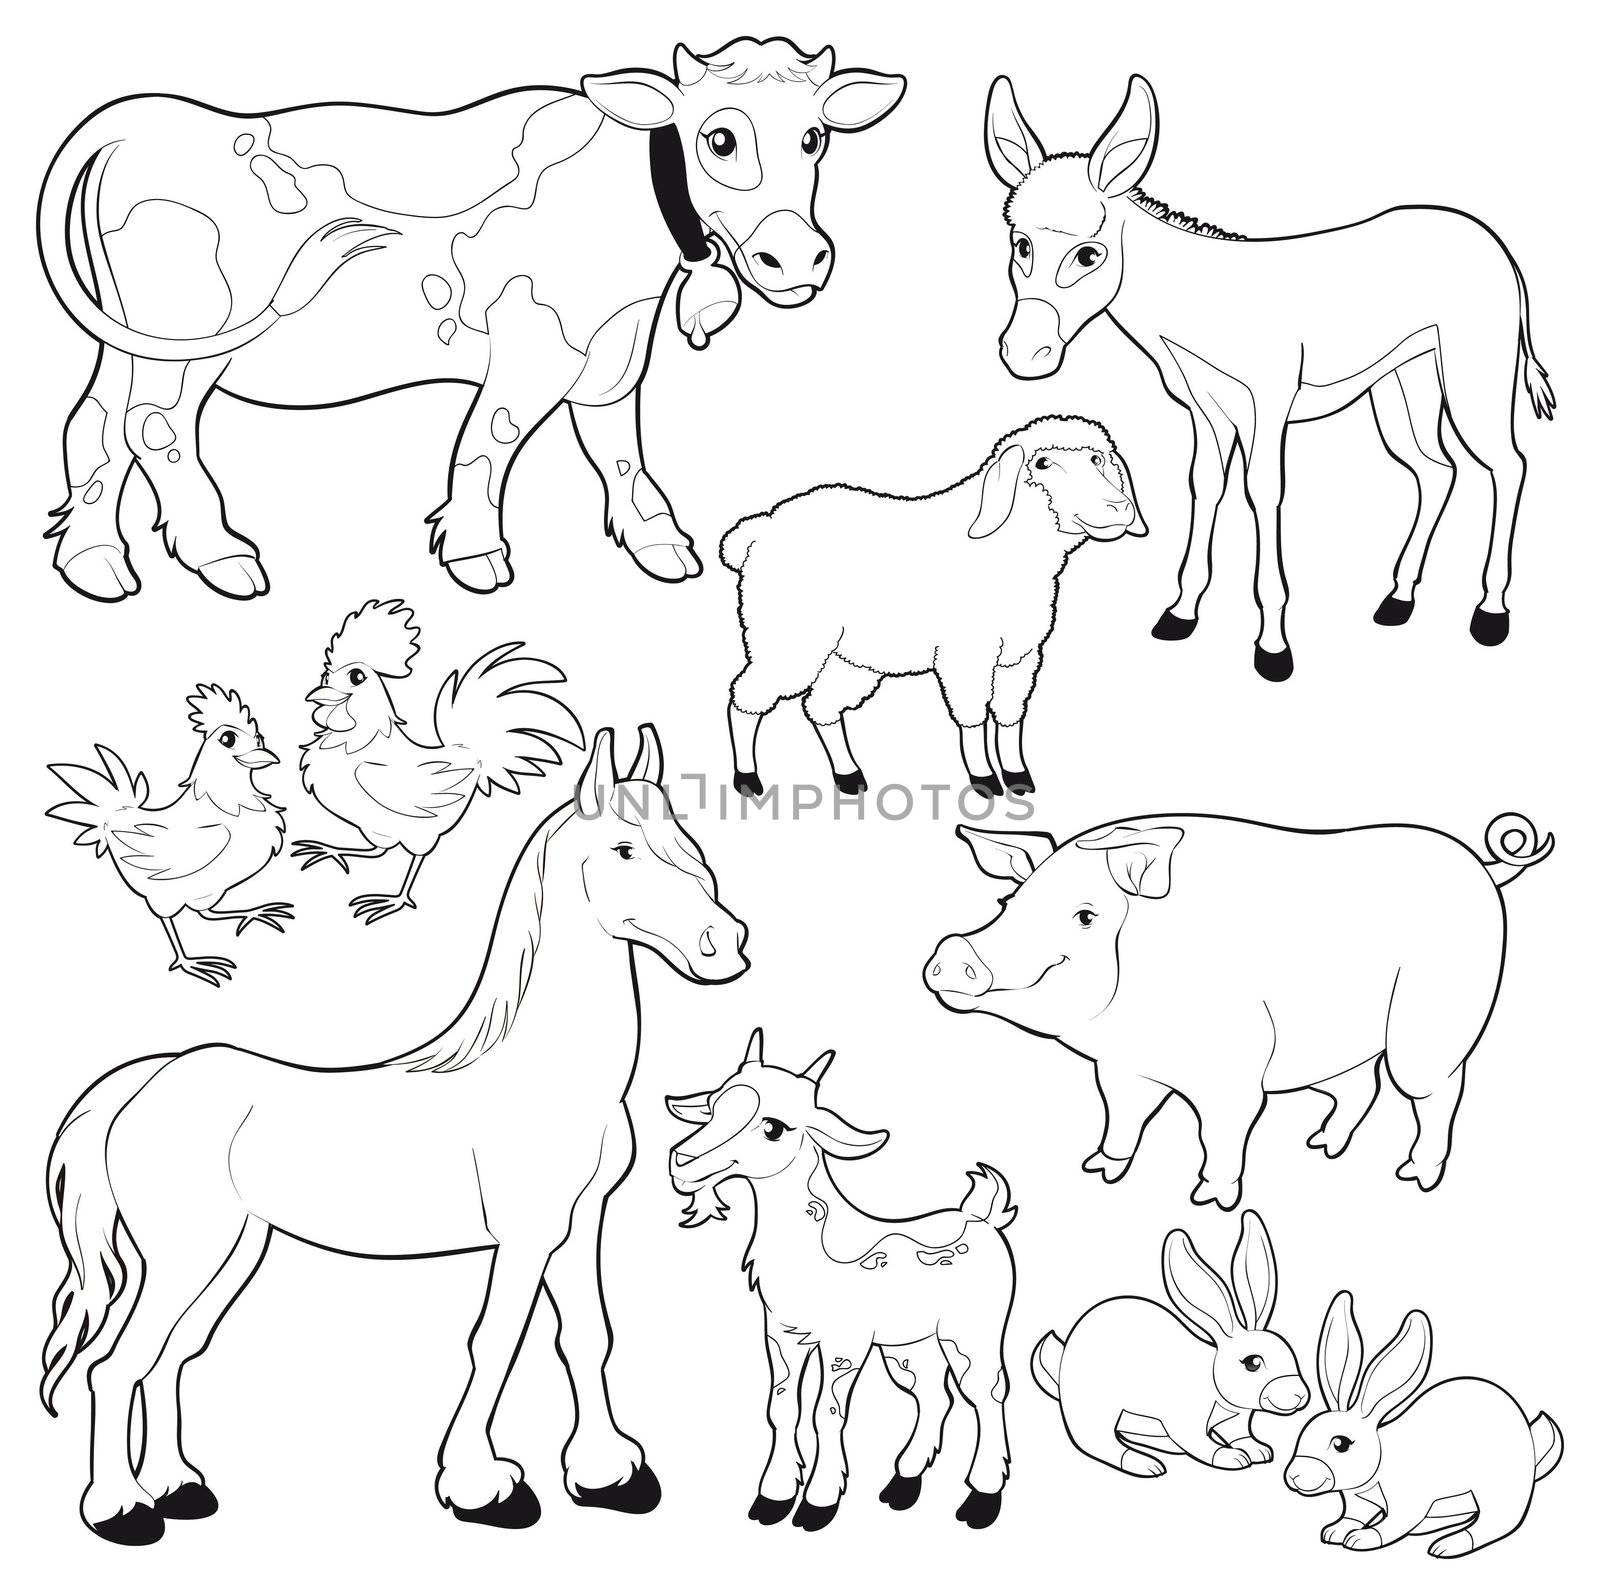 Farm animals. Vector and cartoon isolated black/white characters.

